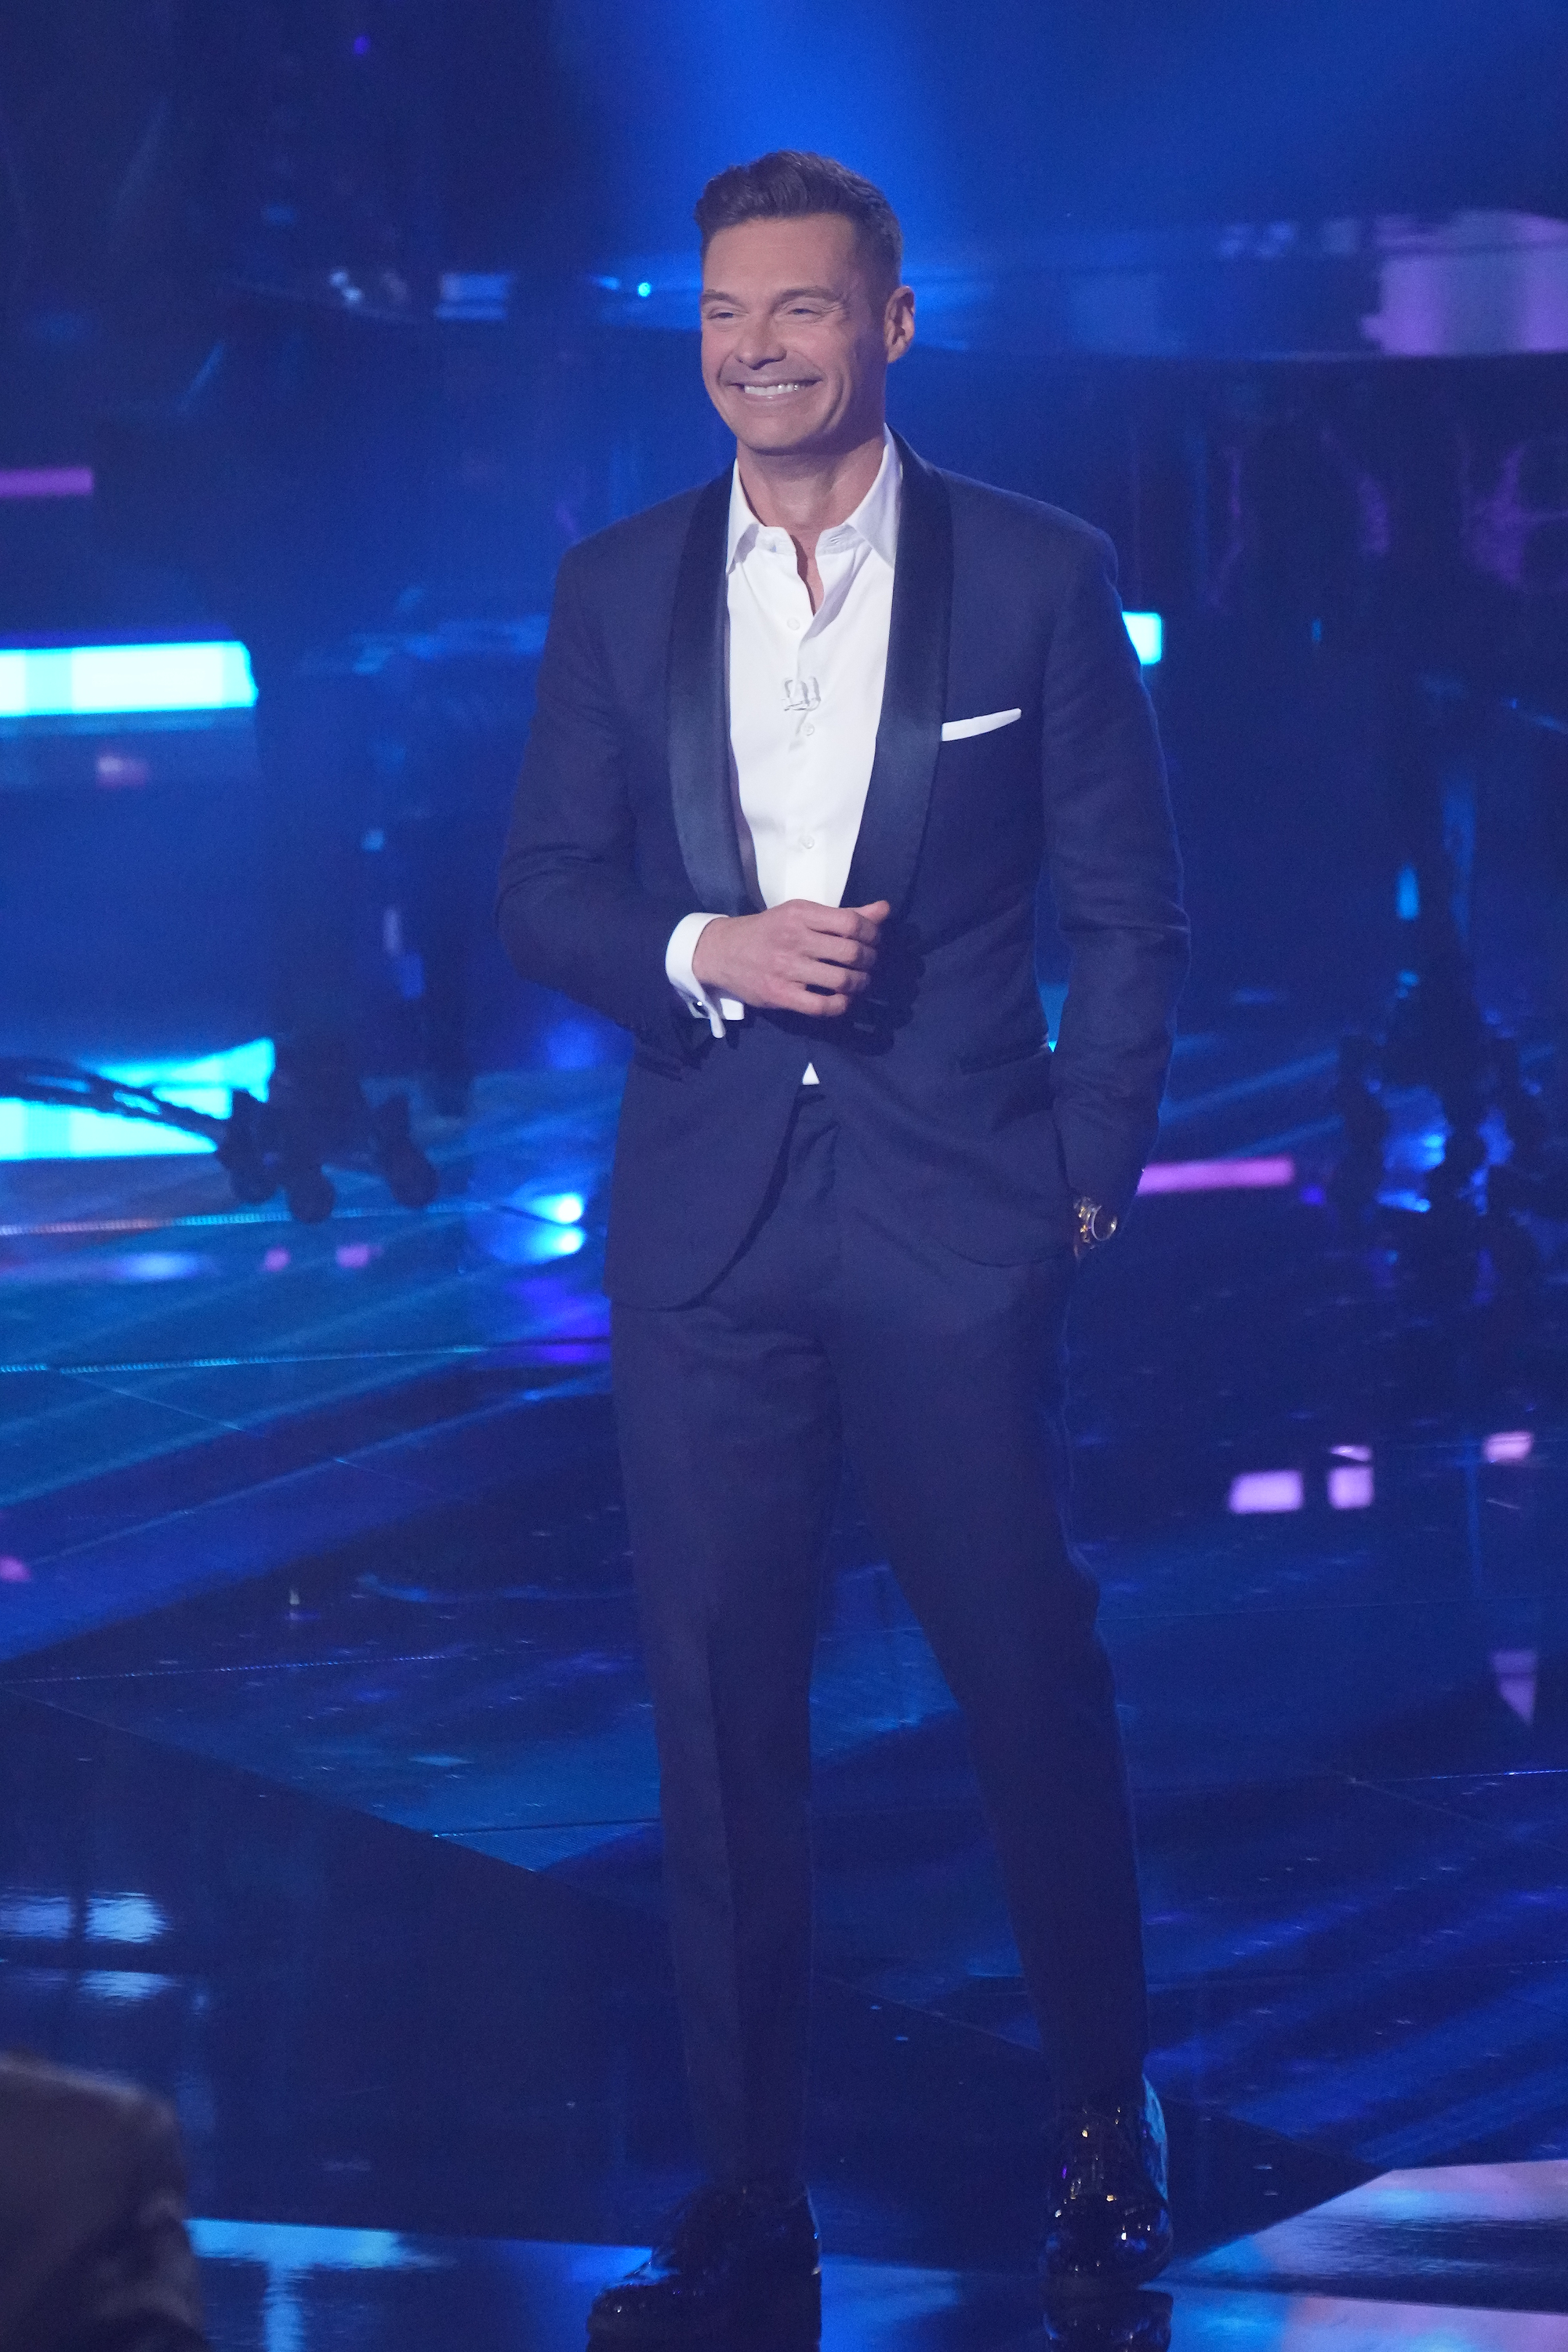 Ryan Seacrest on Episode 618 (Season Finale) of "American Idol" on May 1, 2023. | Source: Getty Images